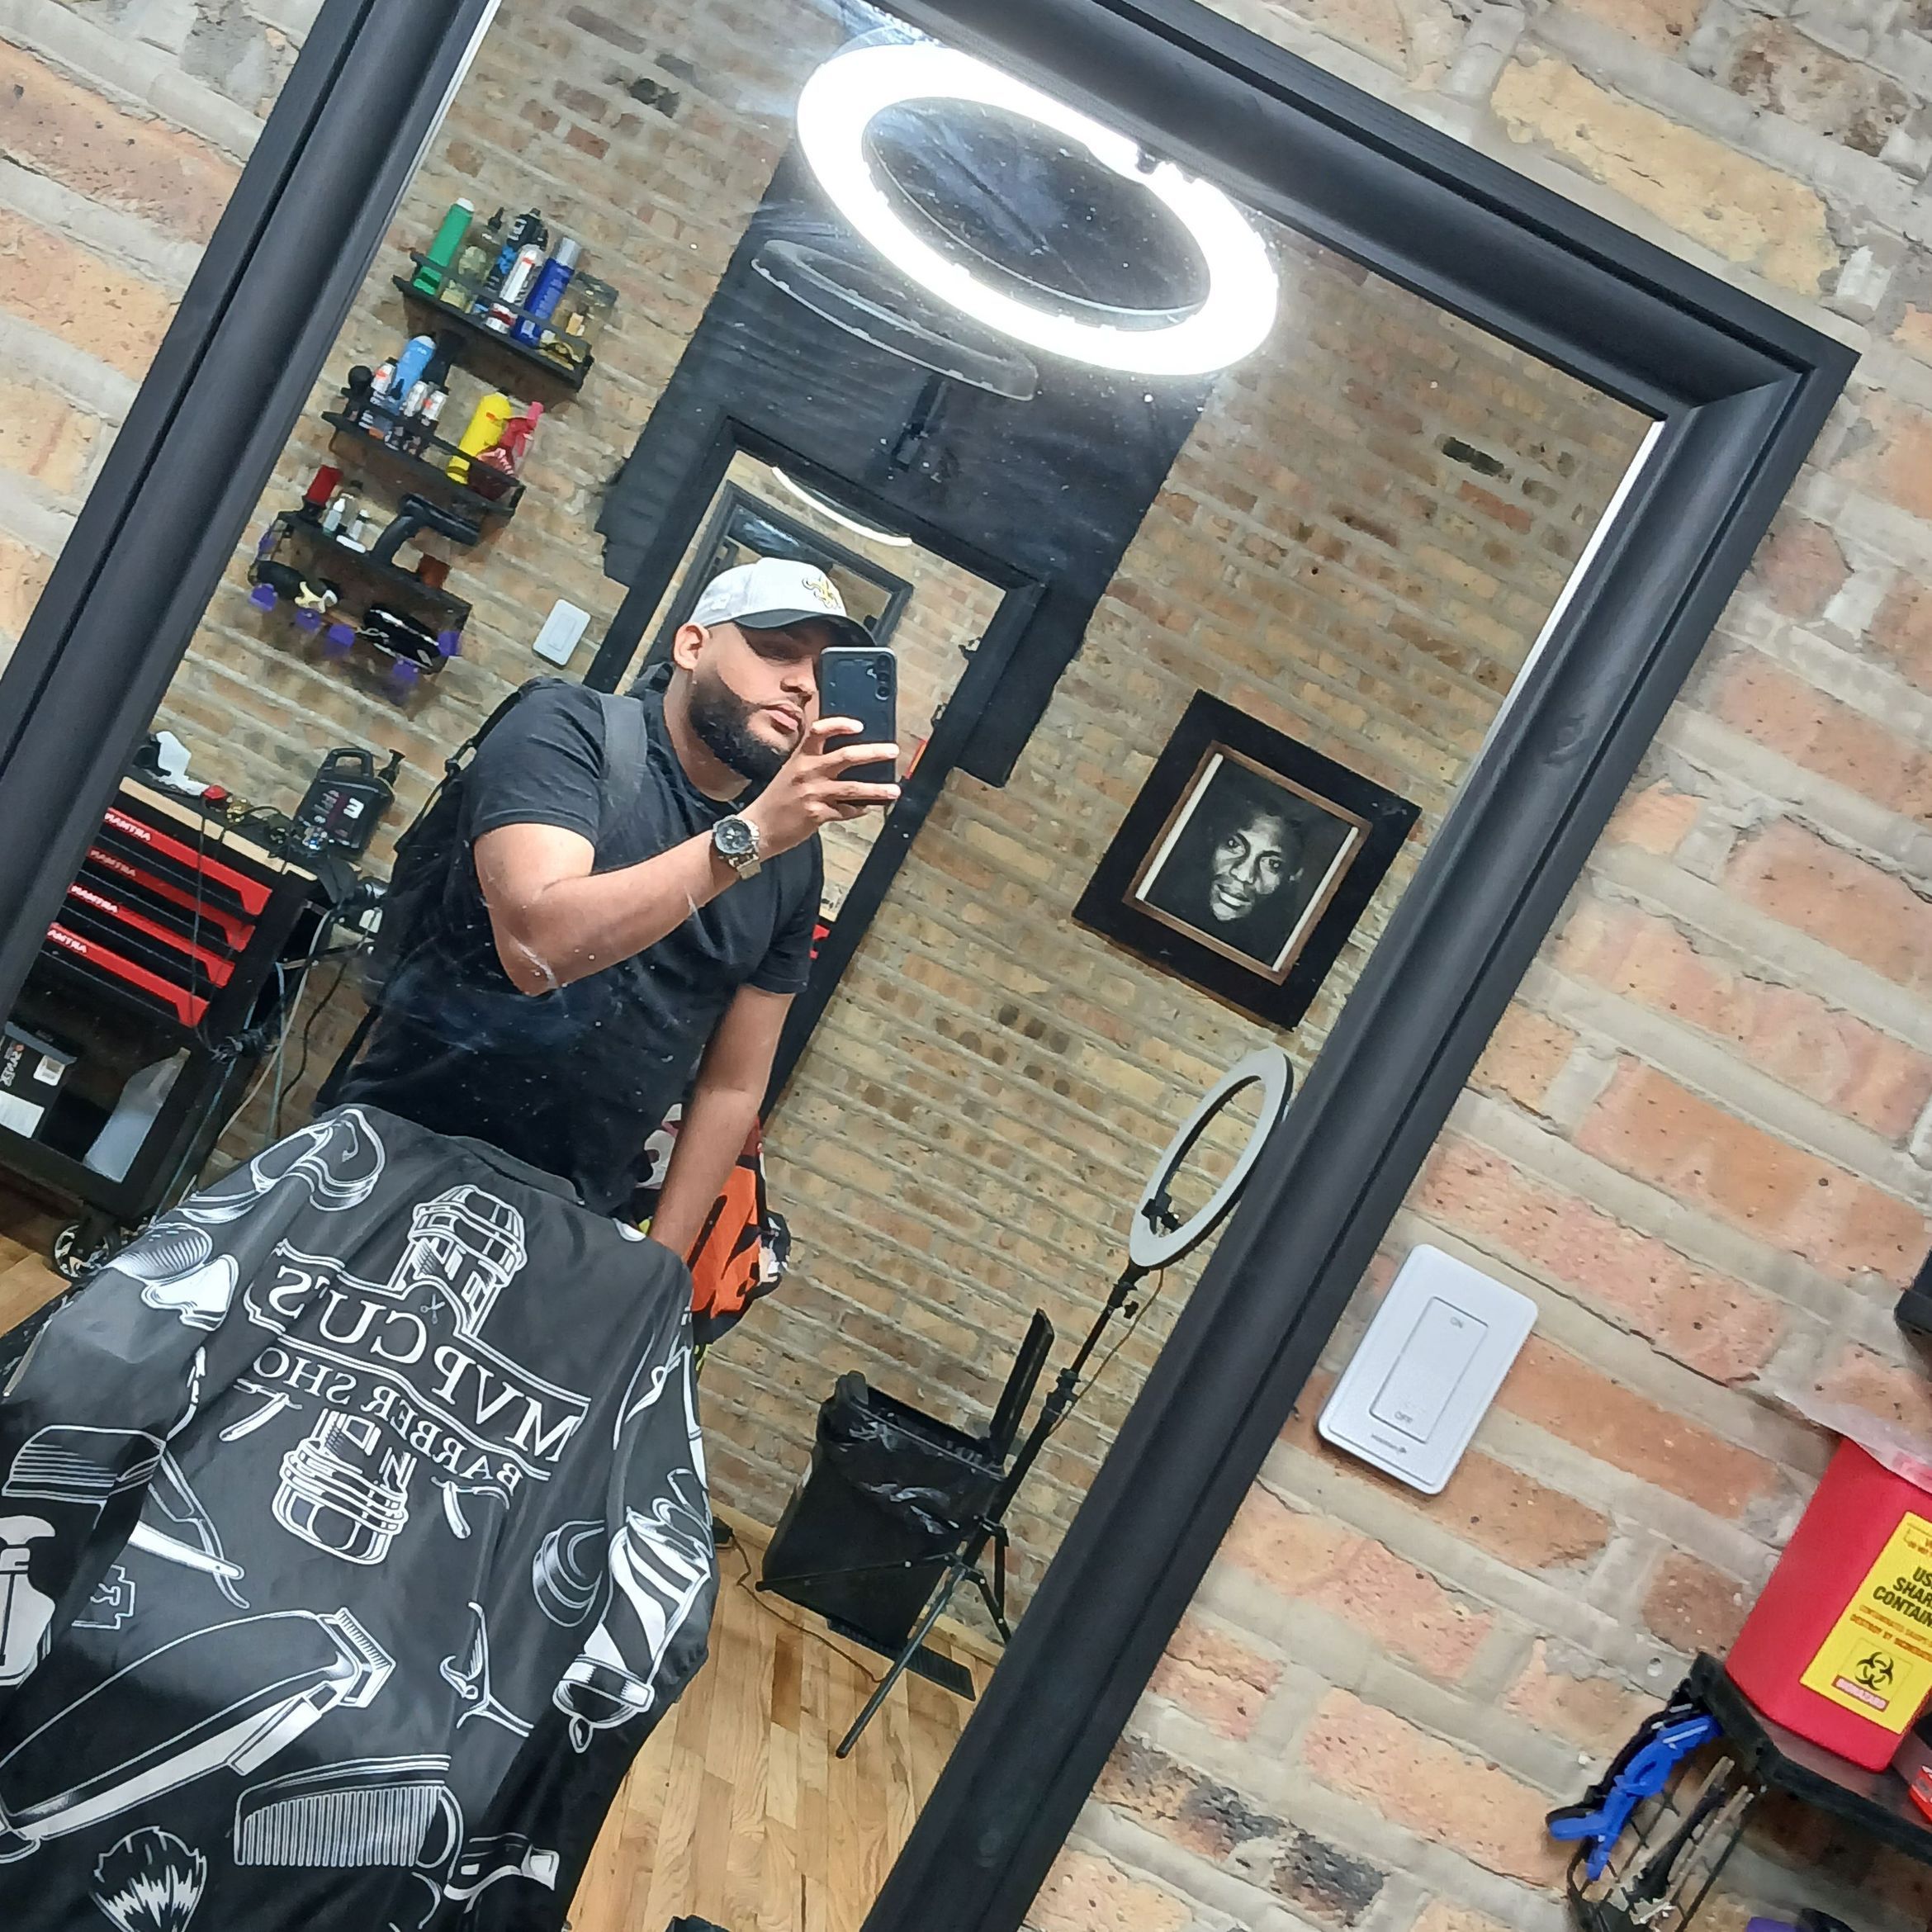 @Soto Mvp Cuts, 1109 N Western Ave, Chicago, 60622